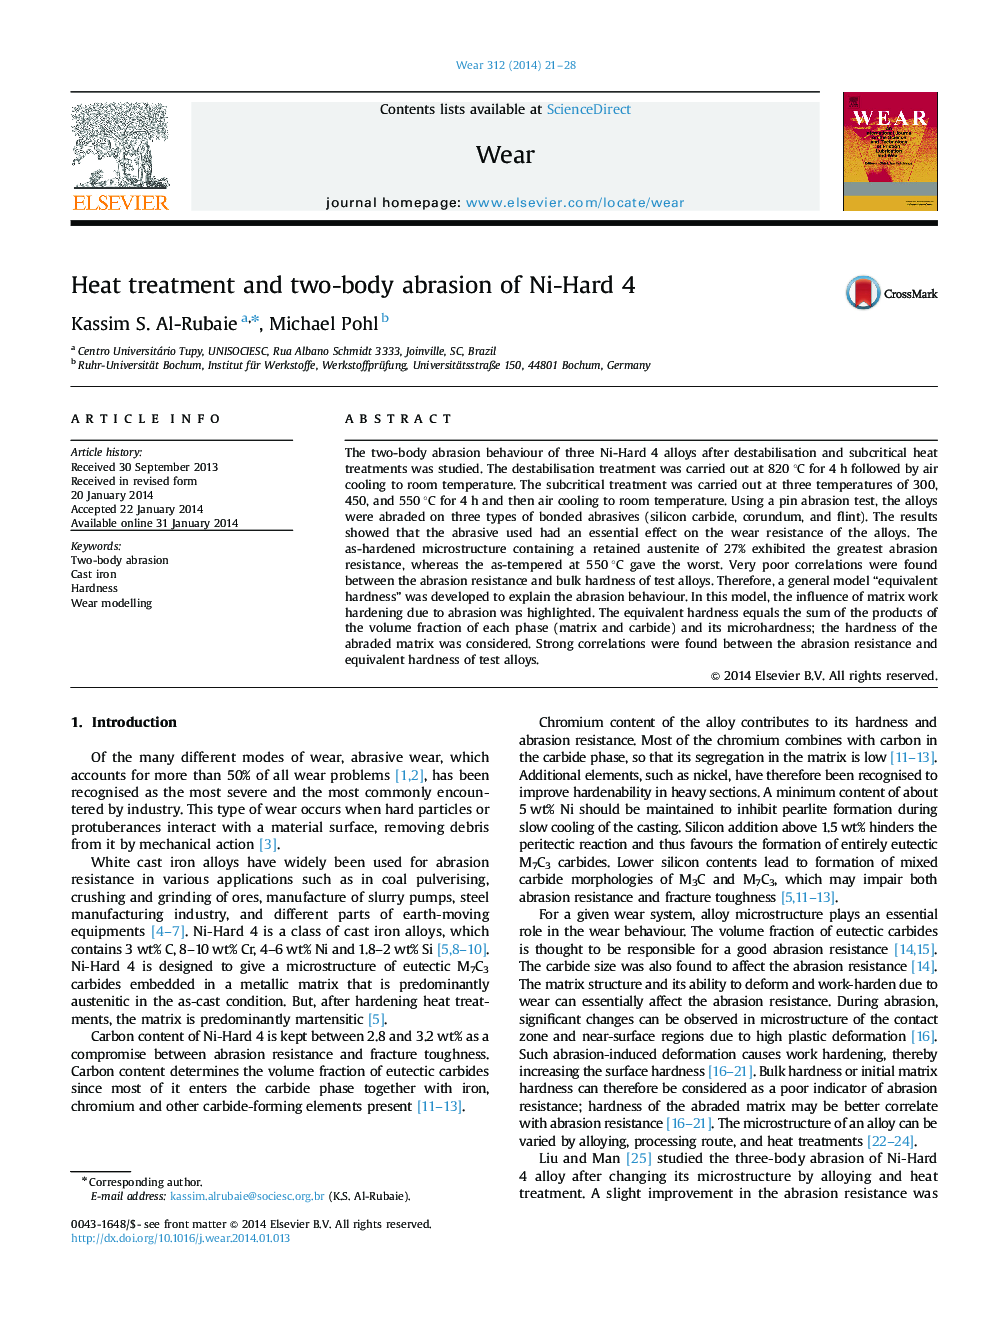 Heat treatment and two-body abrasion of Ni-Hard 4